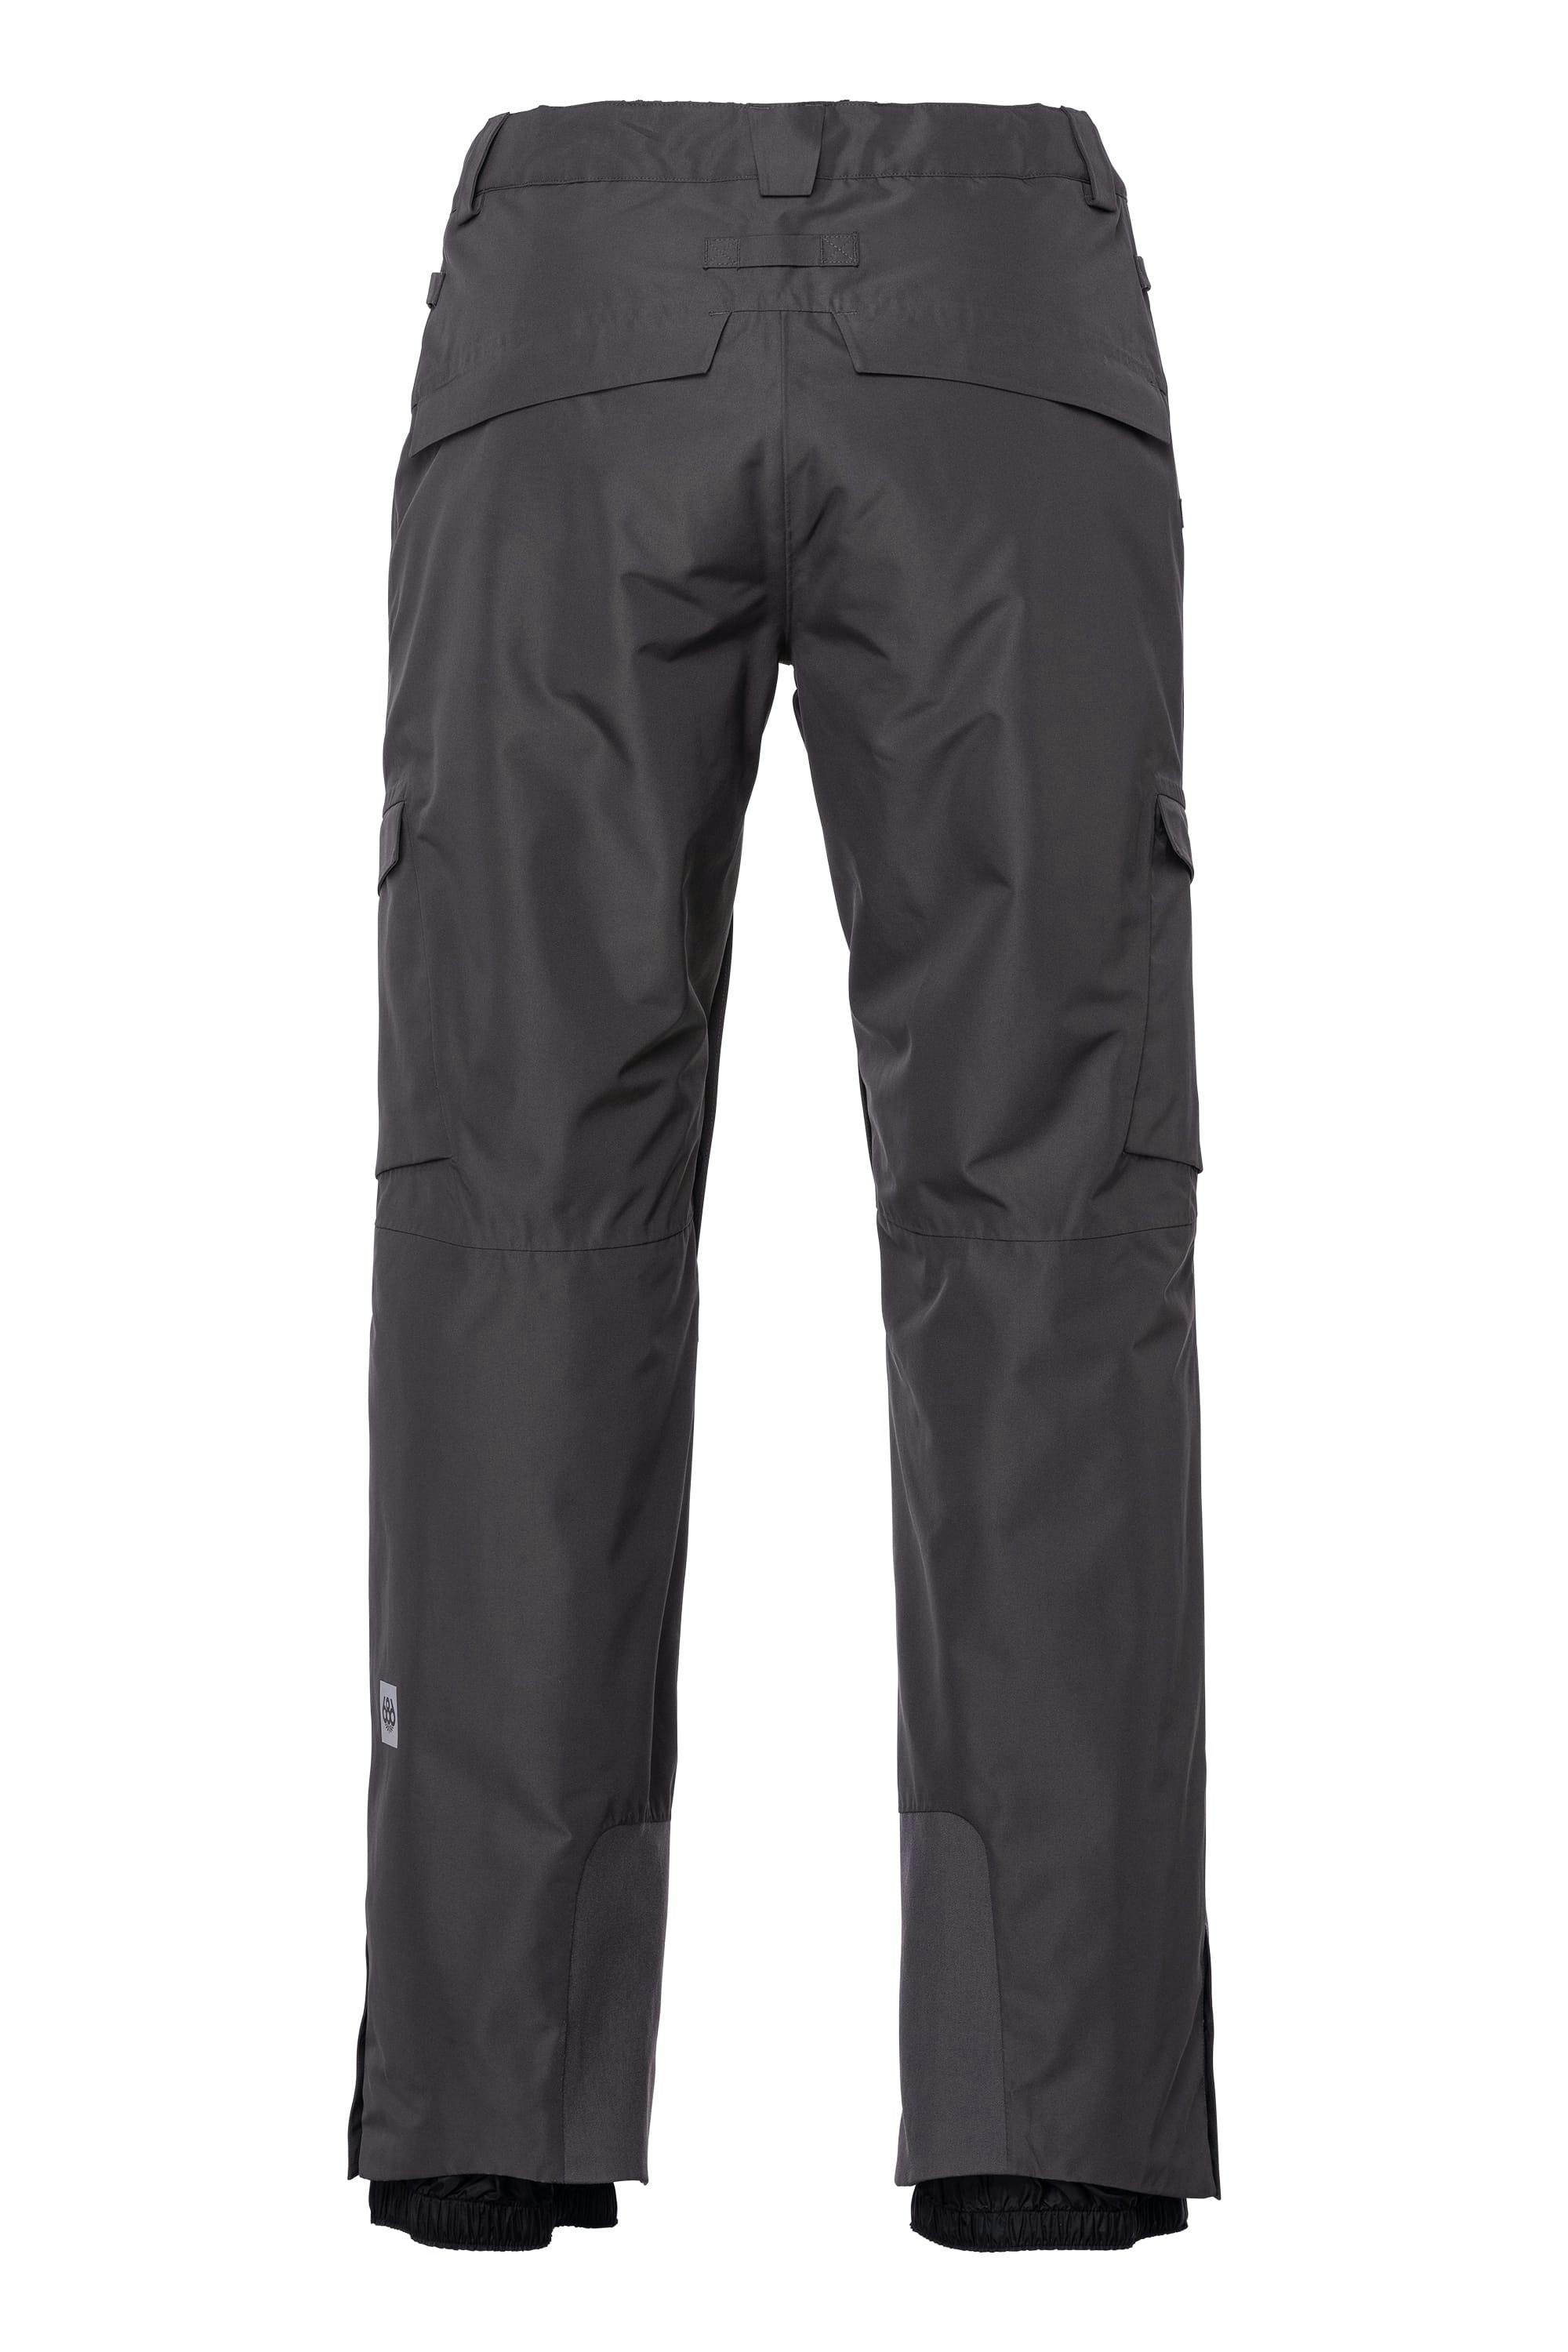 686 Men's Quantum Thermagraph 2L Insulated Pant